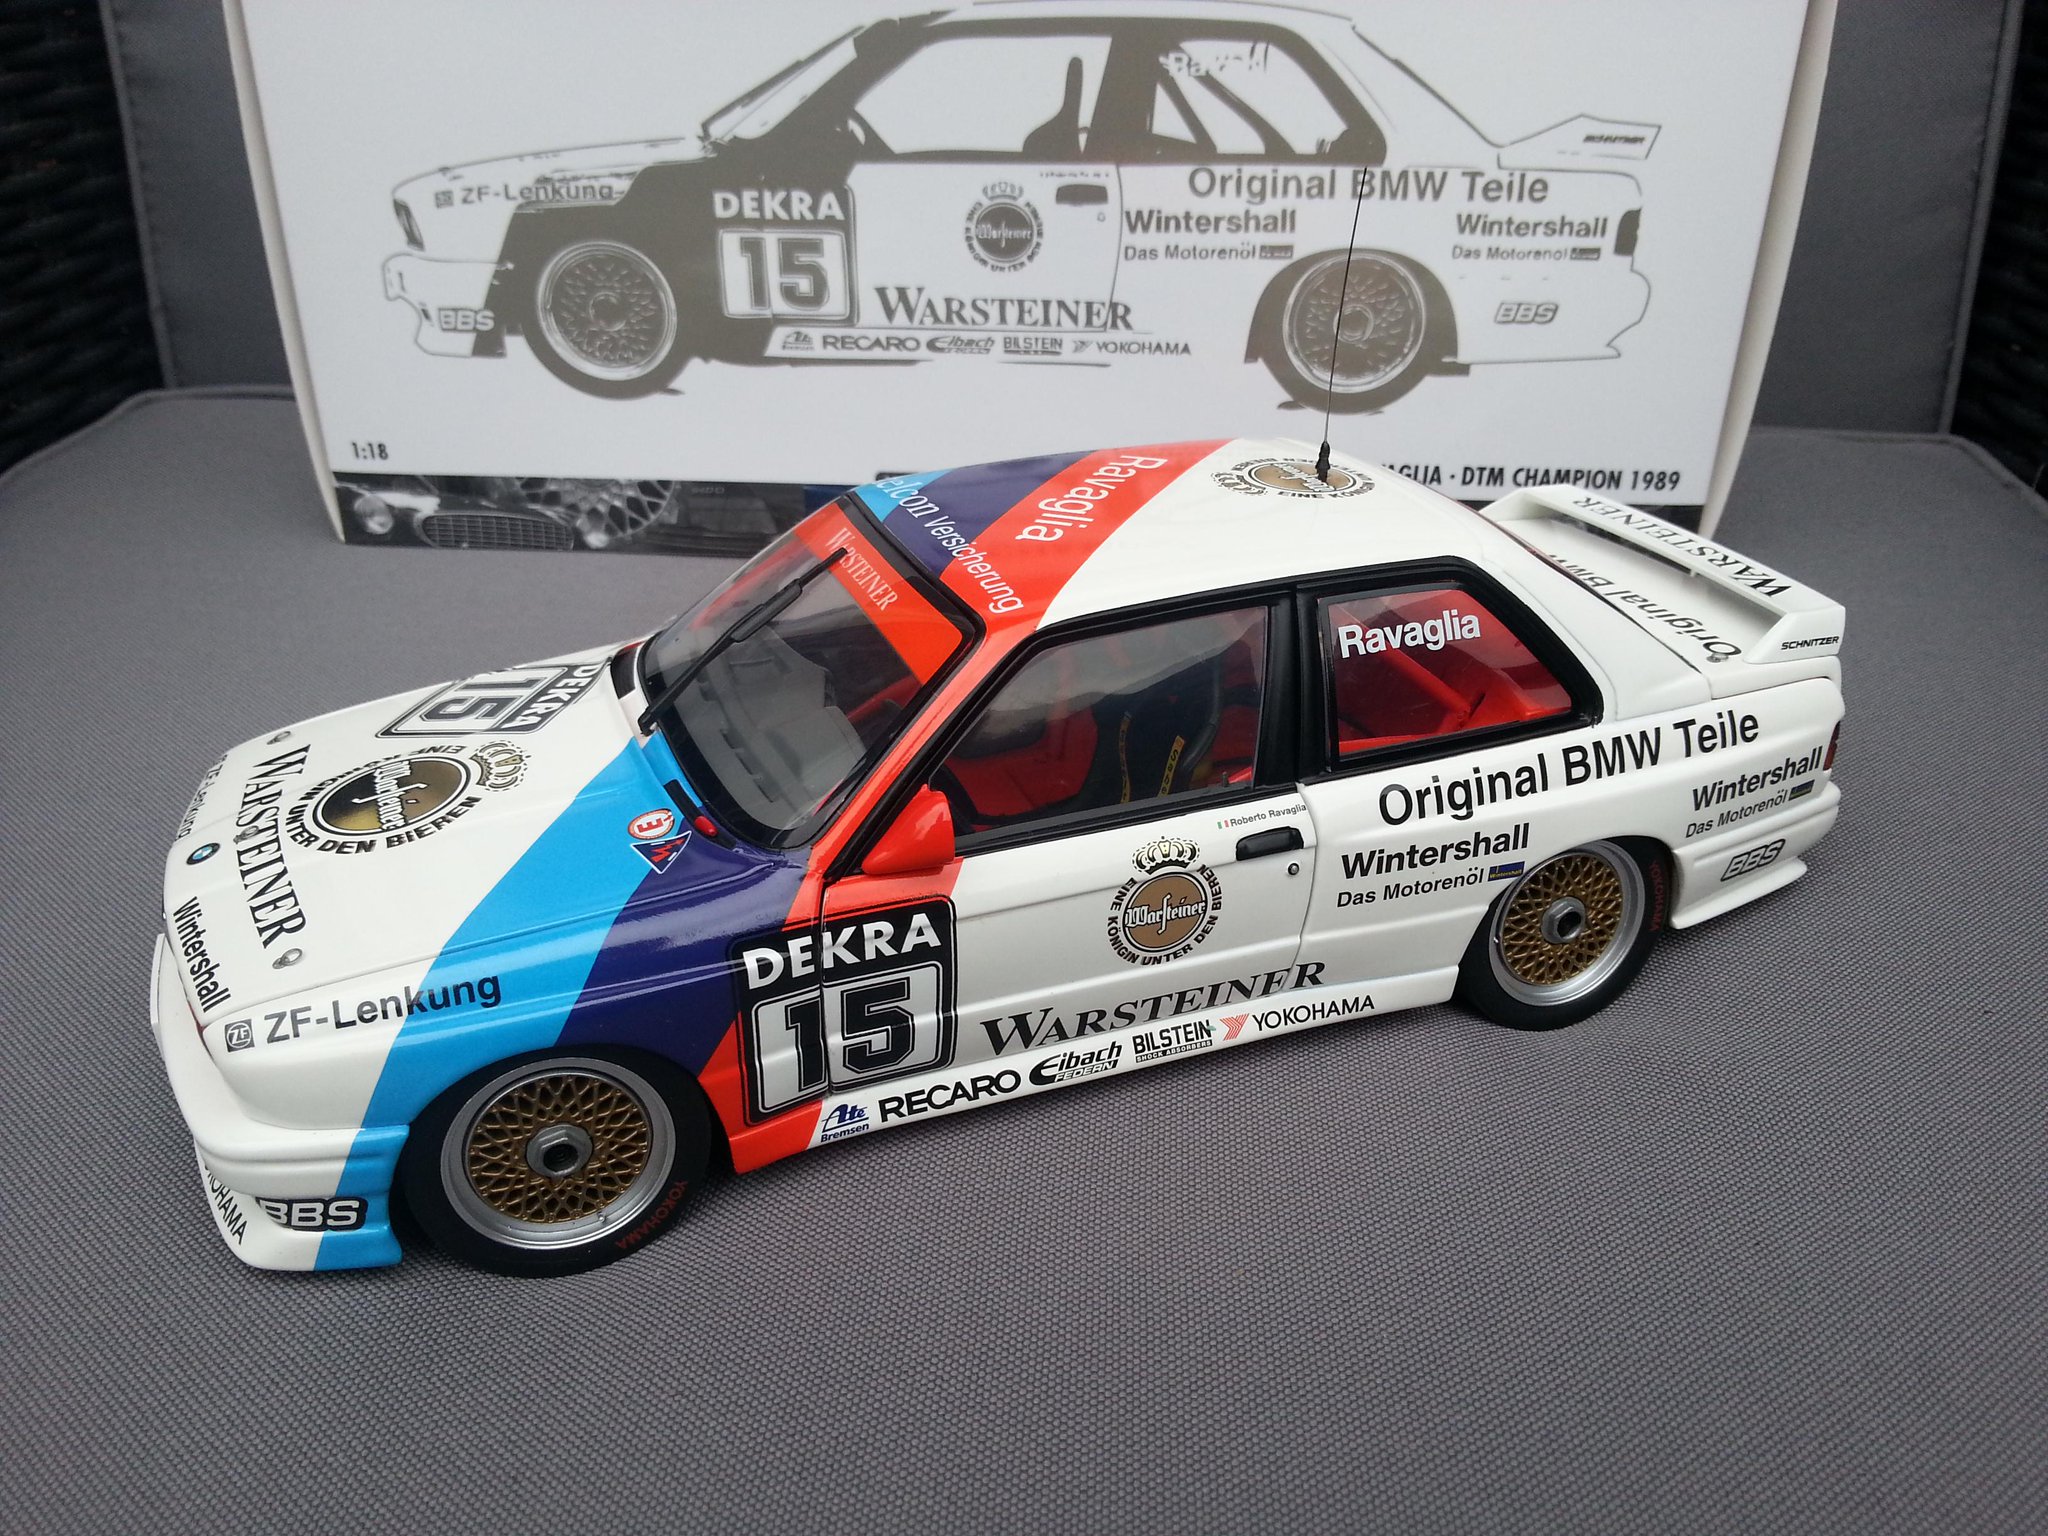 Johnruikes The Great Schnitzer Bmw M3 0 Winner Dtm 19 Roberto Ravaglia Another Part Of My Collection 1 18 By Minichamps Http T Co Gn7gcdgfus